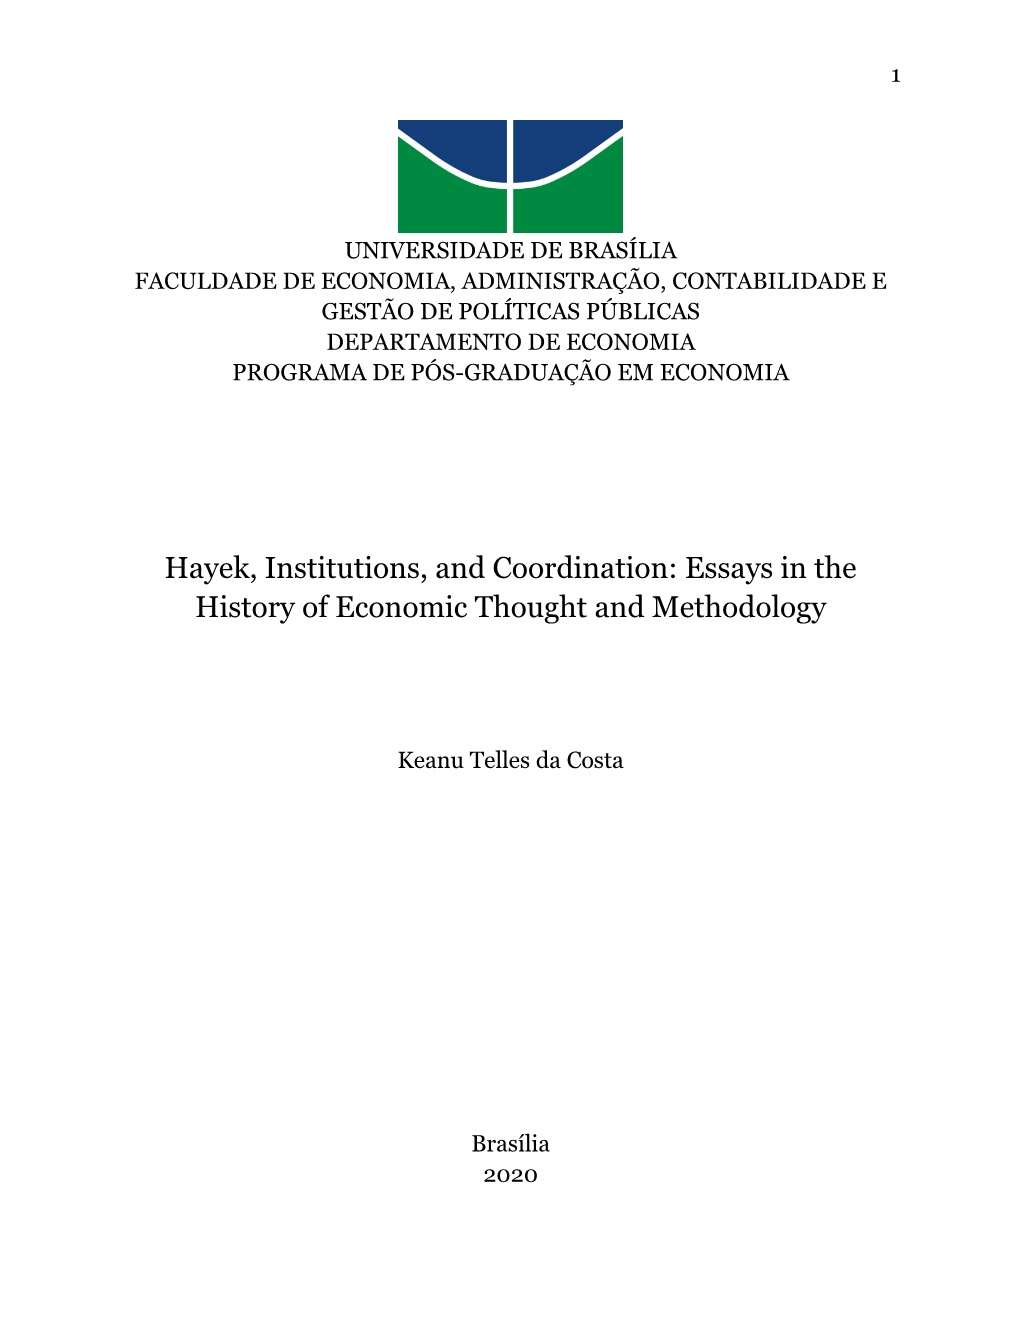 Hayek, Institutions, and Coordination: Essays in the History of Economic Thought and Methodology